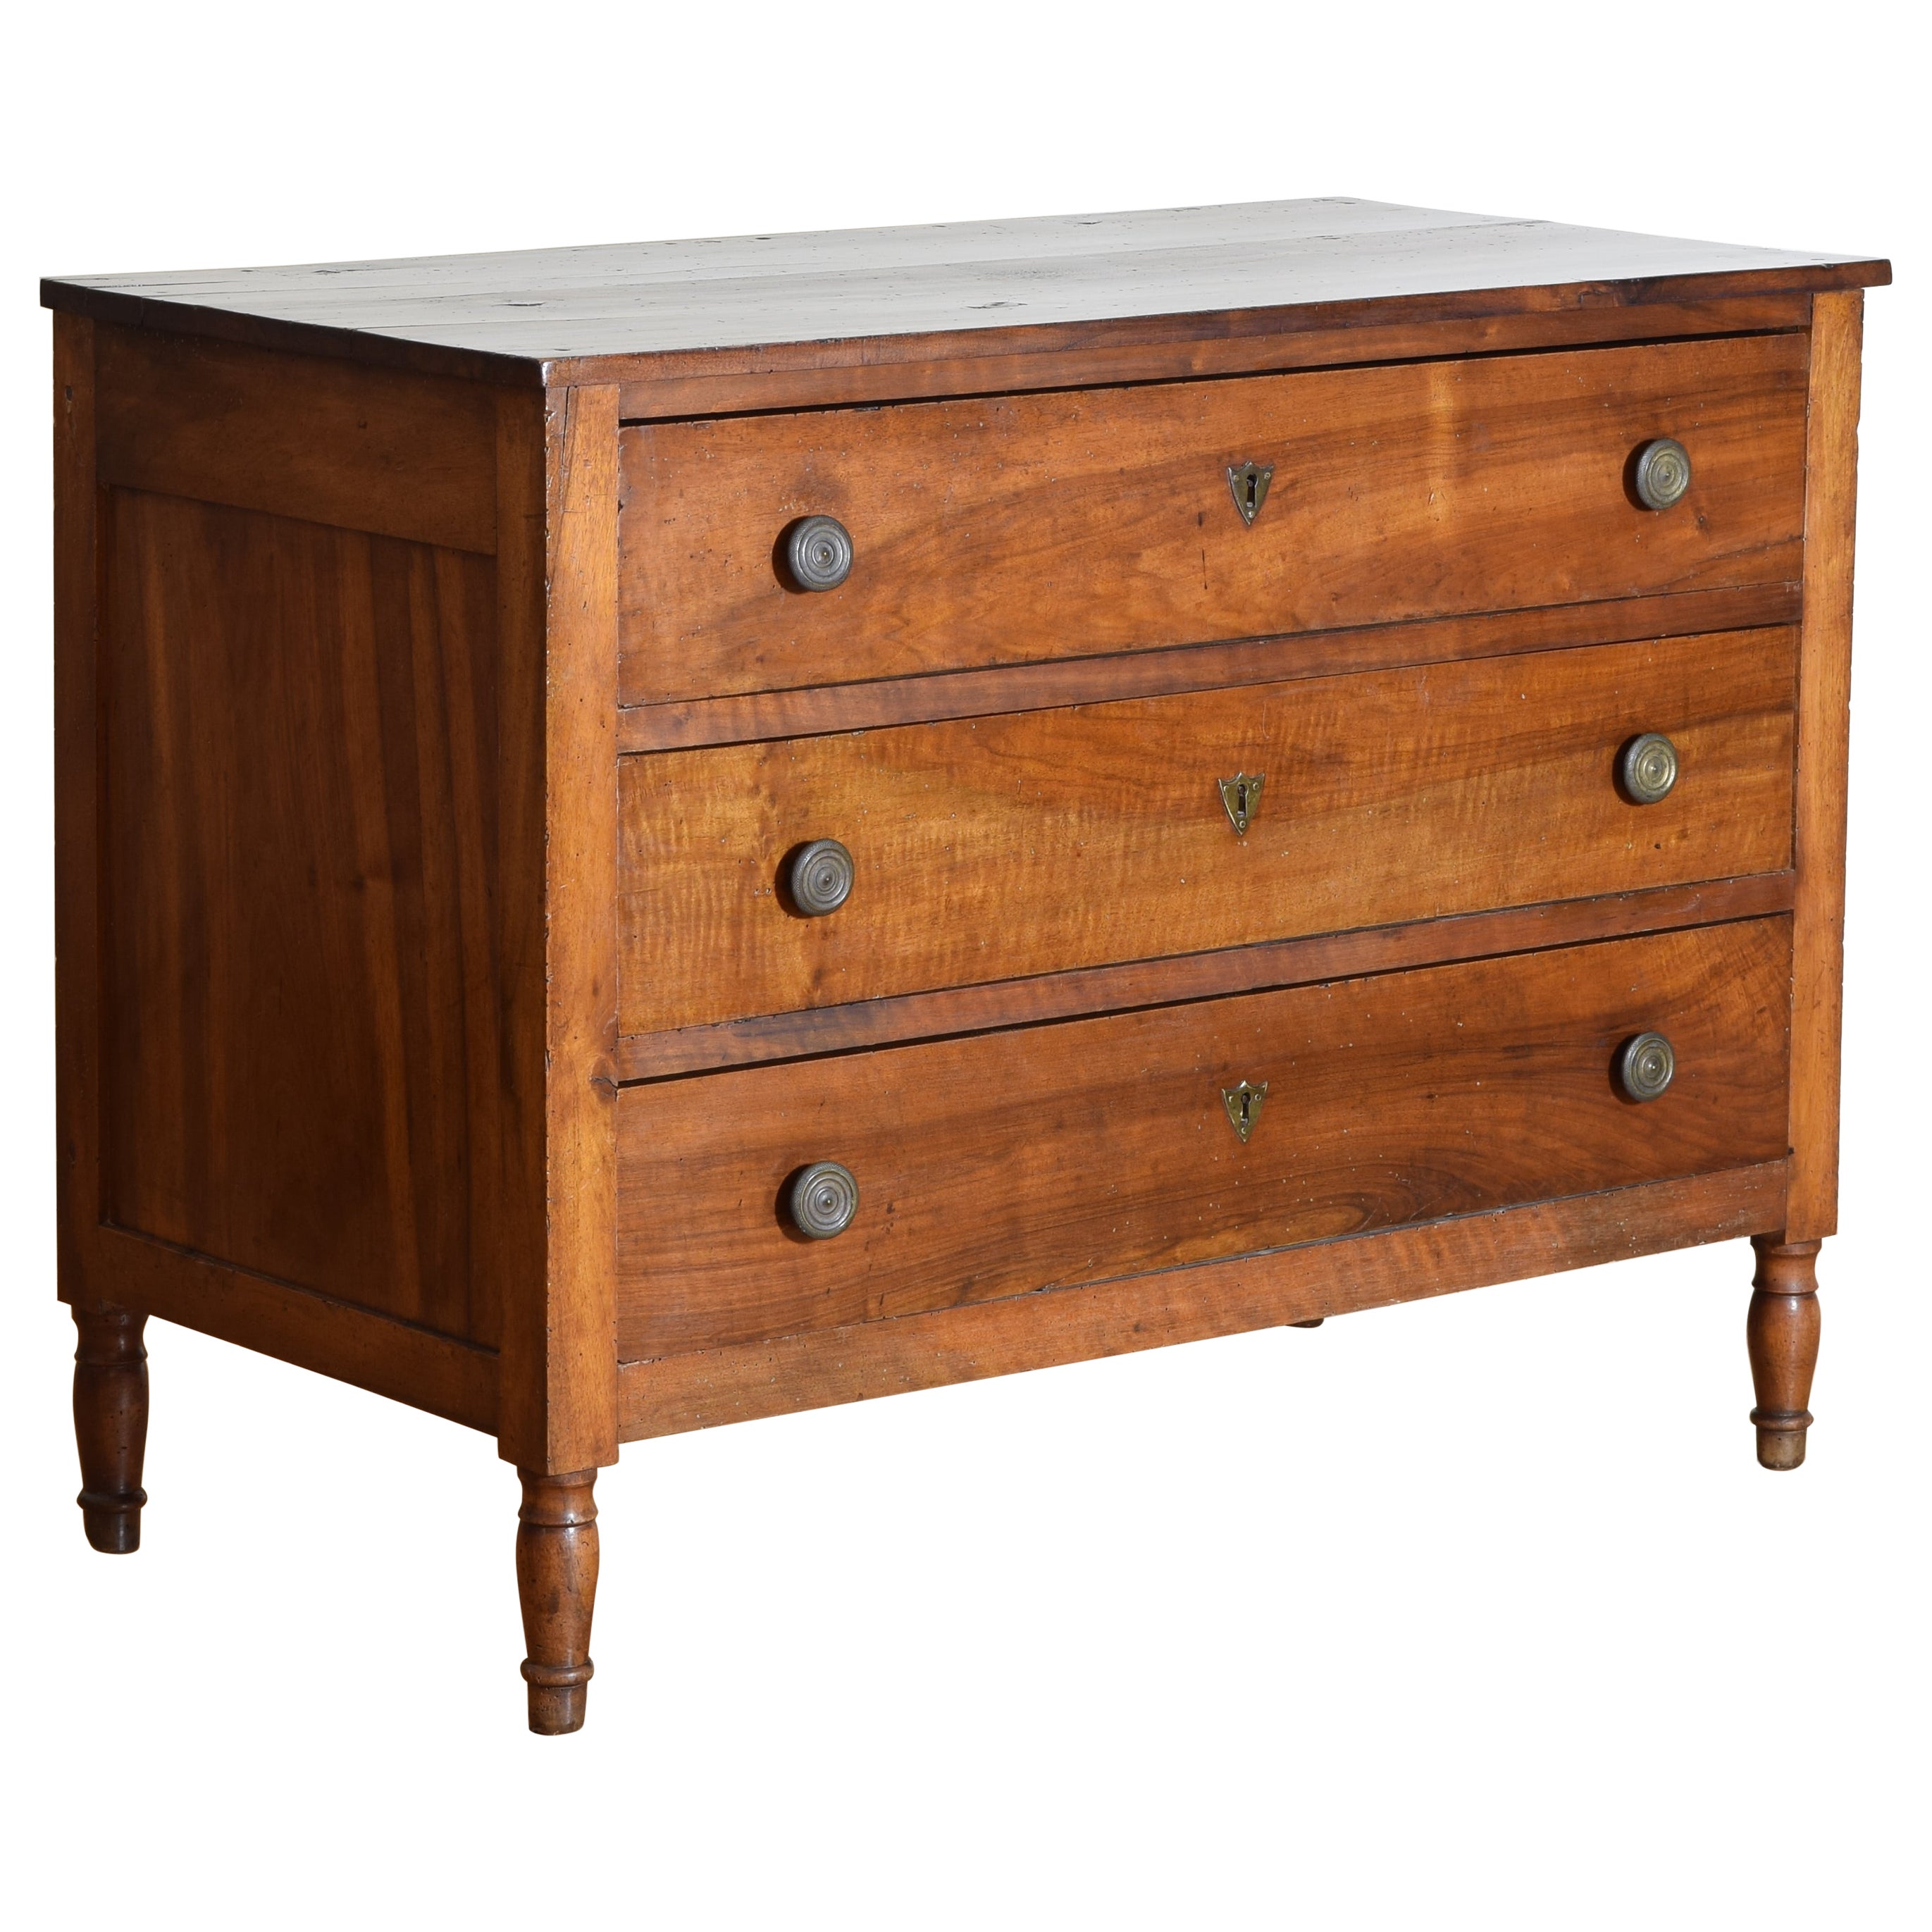 French Early Neoclassic Cherrywood 3-Drawer Commode, ca. 1800